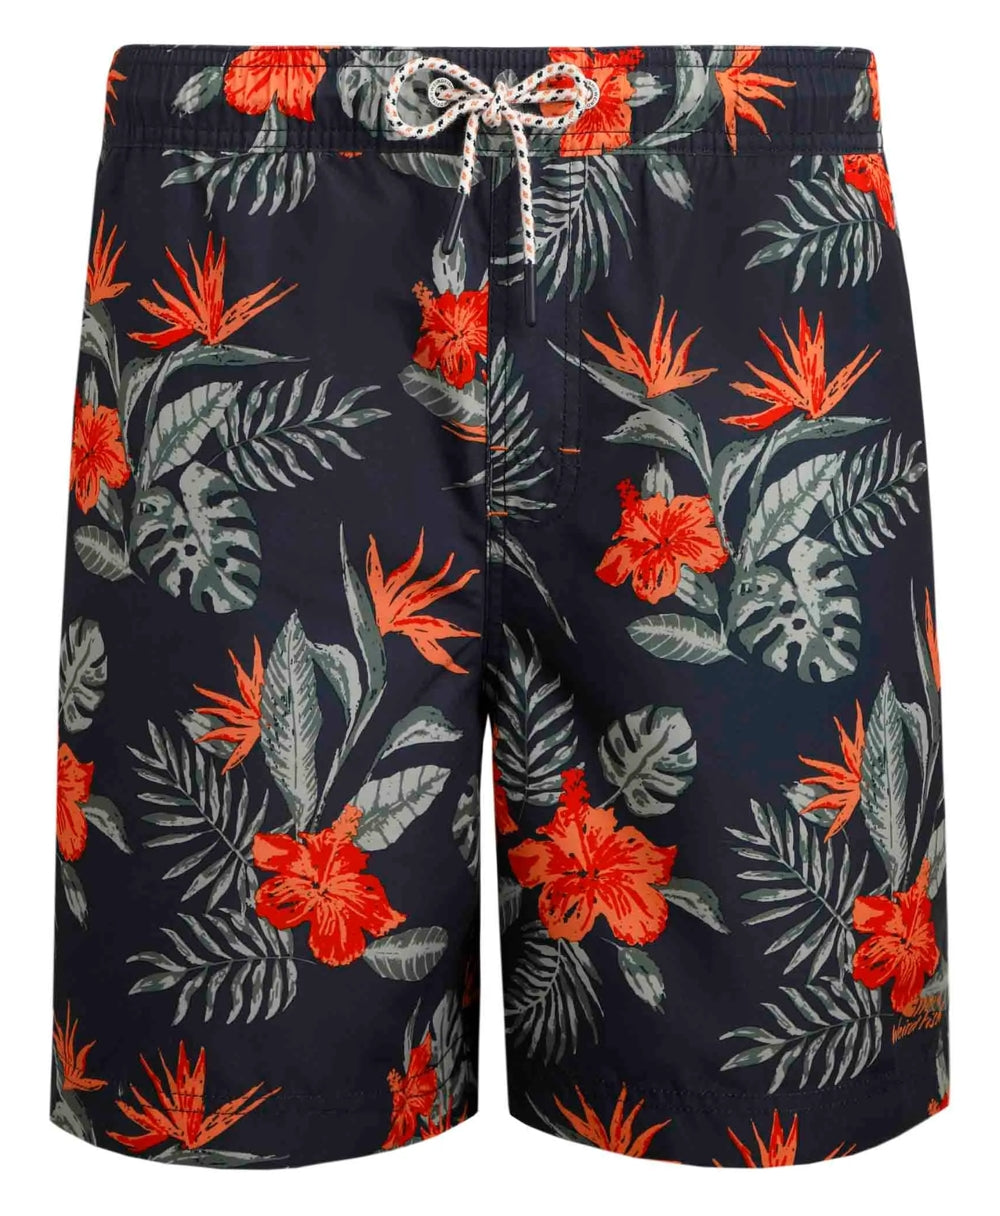 Men's Weird Fish Belukha elastic waist swim shorts in Navy with an orange and green tropical floral pattern.